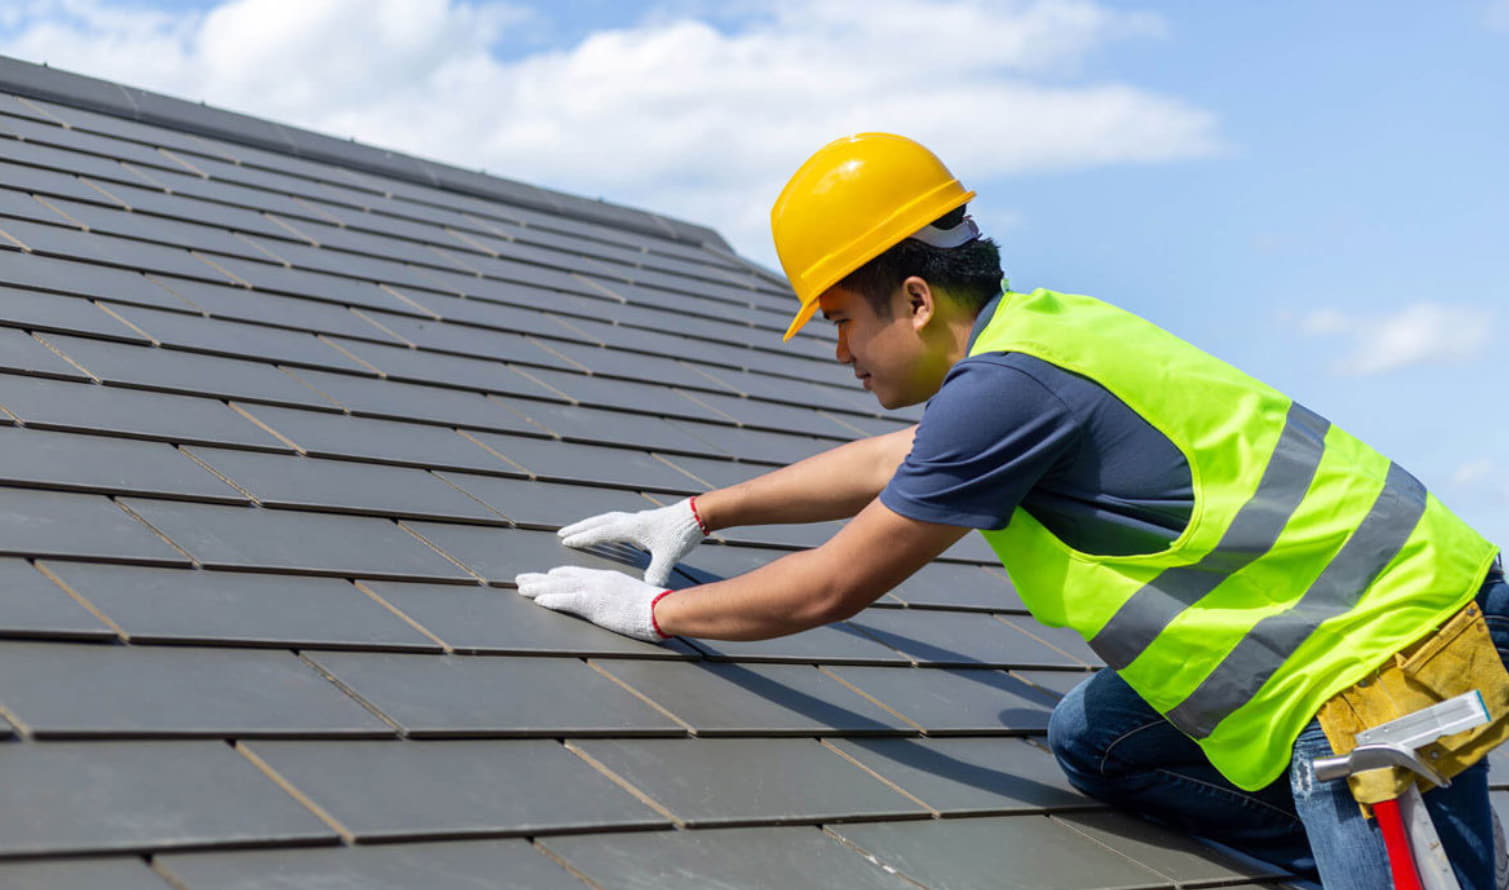 5 Signs That You Need an Emergency Roof Repair ASAP